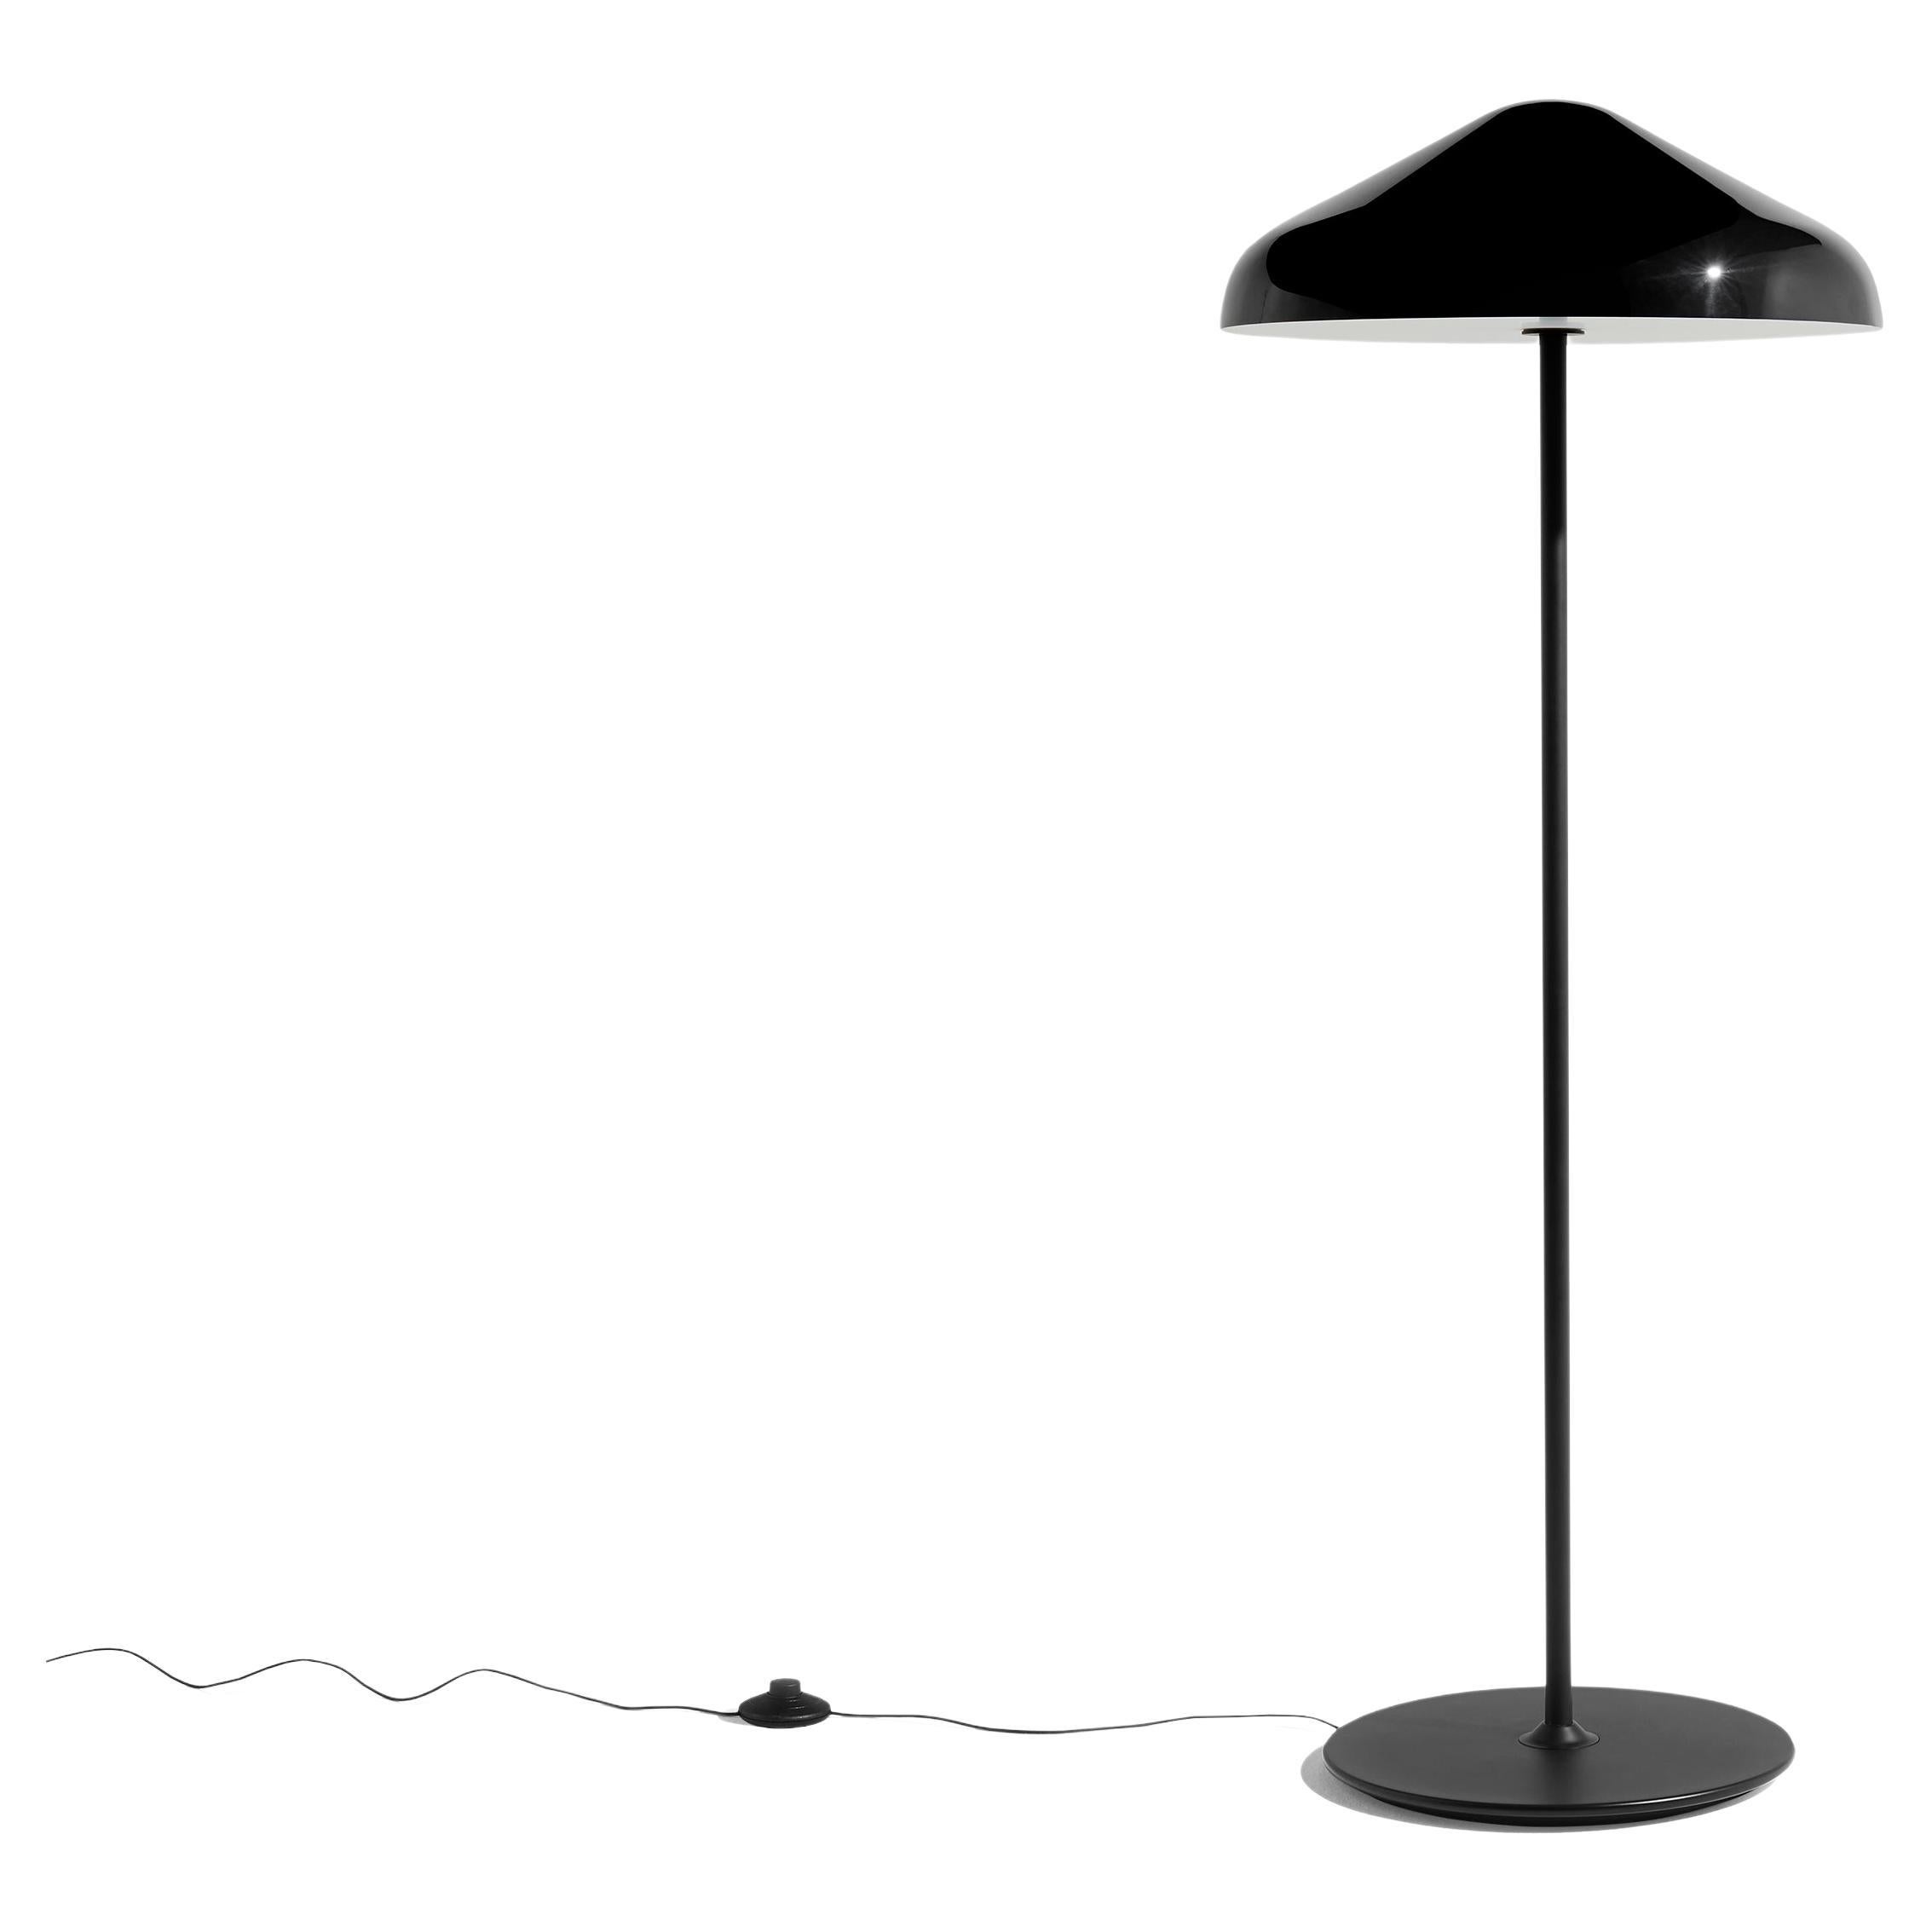 Pao Steel Floor Lamp, Soft Black, by Naoto Fukasawa, for Hay For Sale